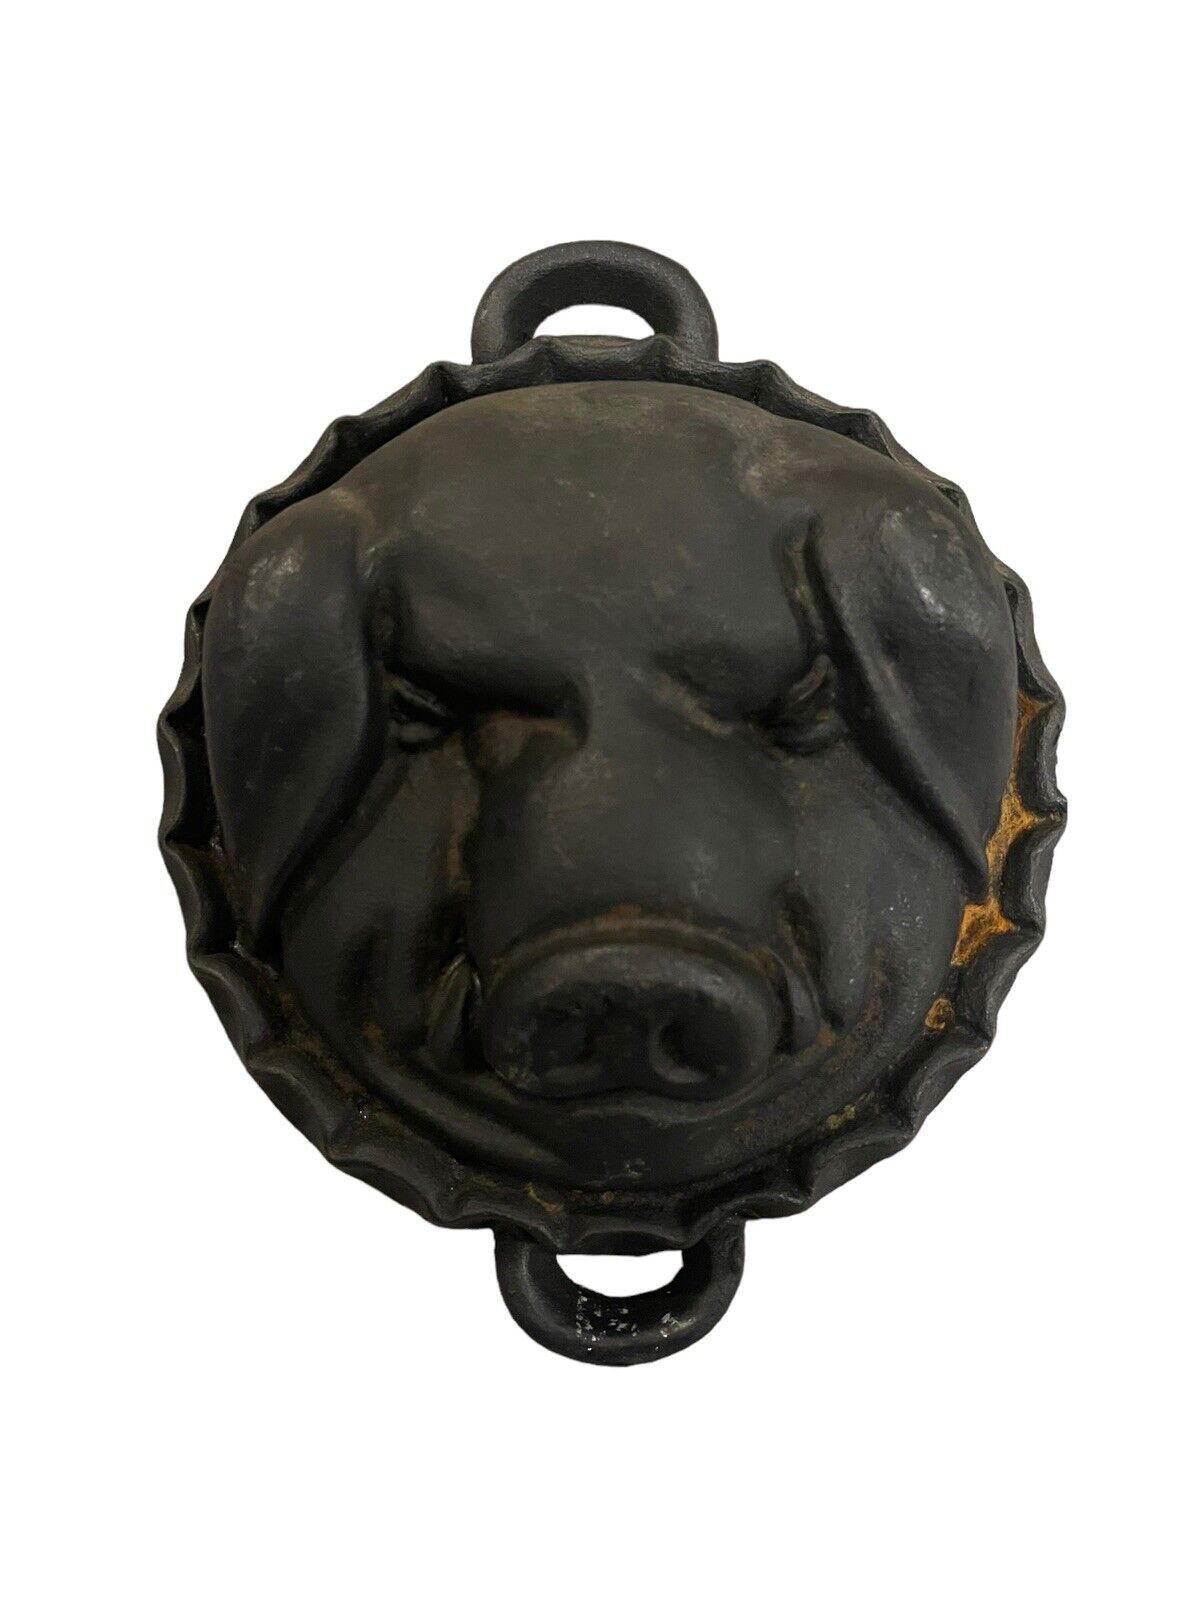 Vintage Cast Iron Pig Face Cheese Mold Hog Head Baking Pan Wall Hanging Heavy